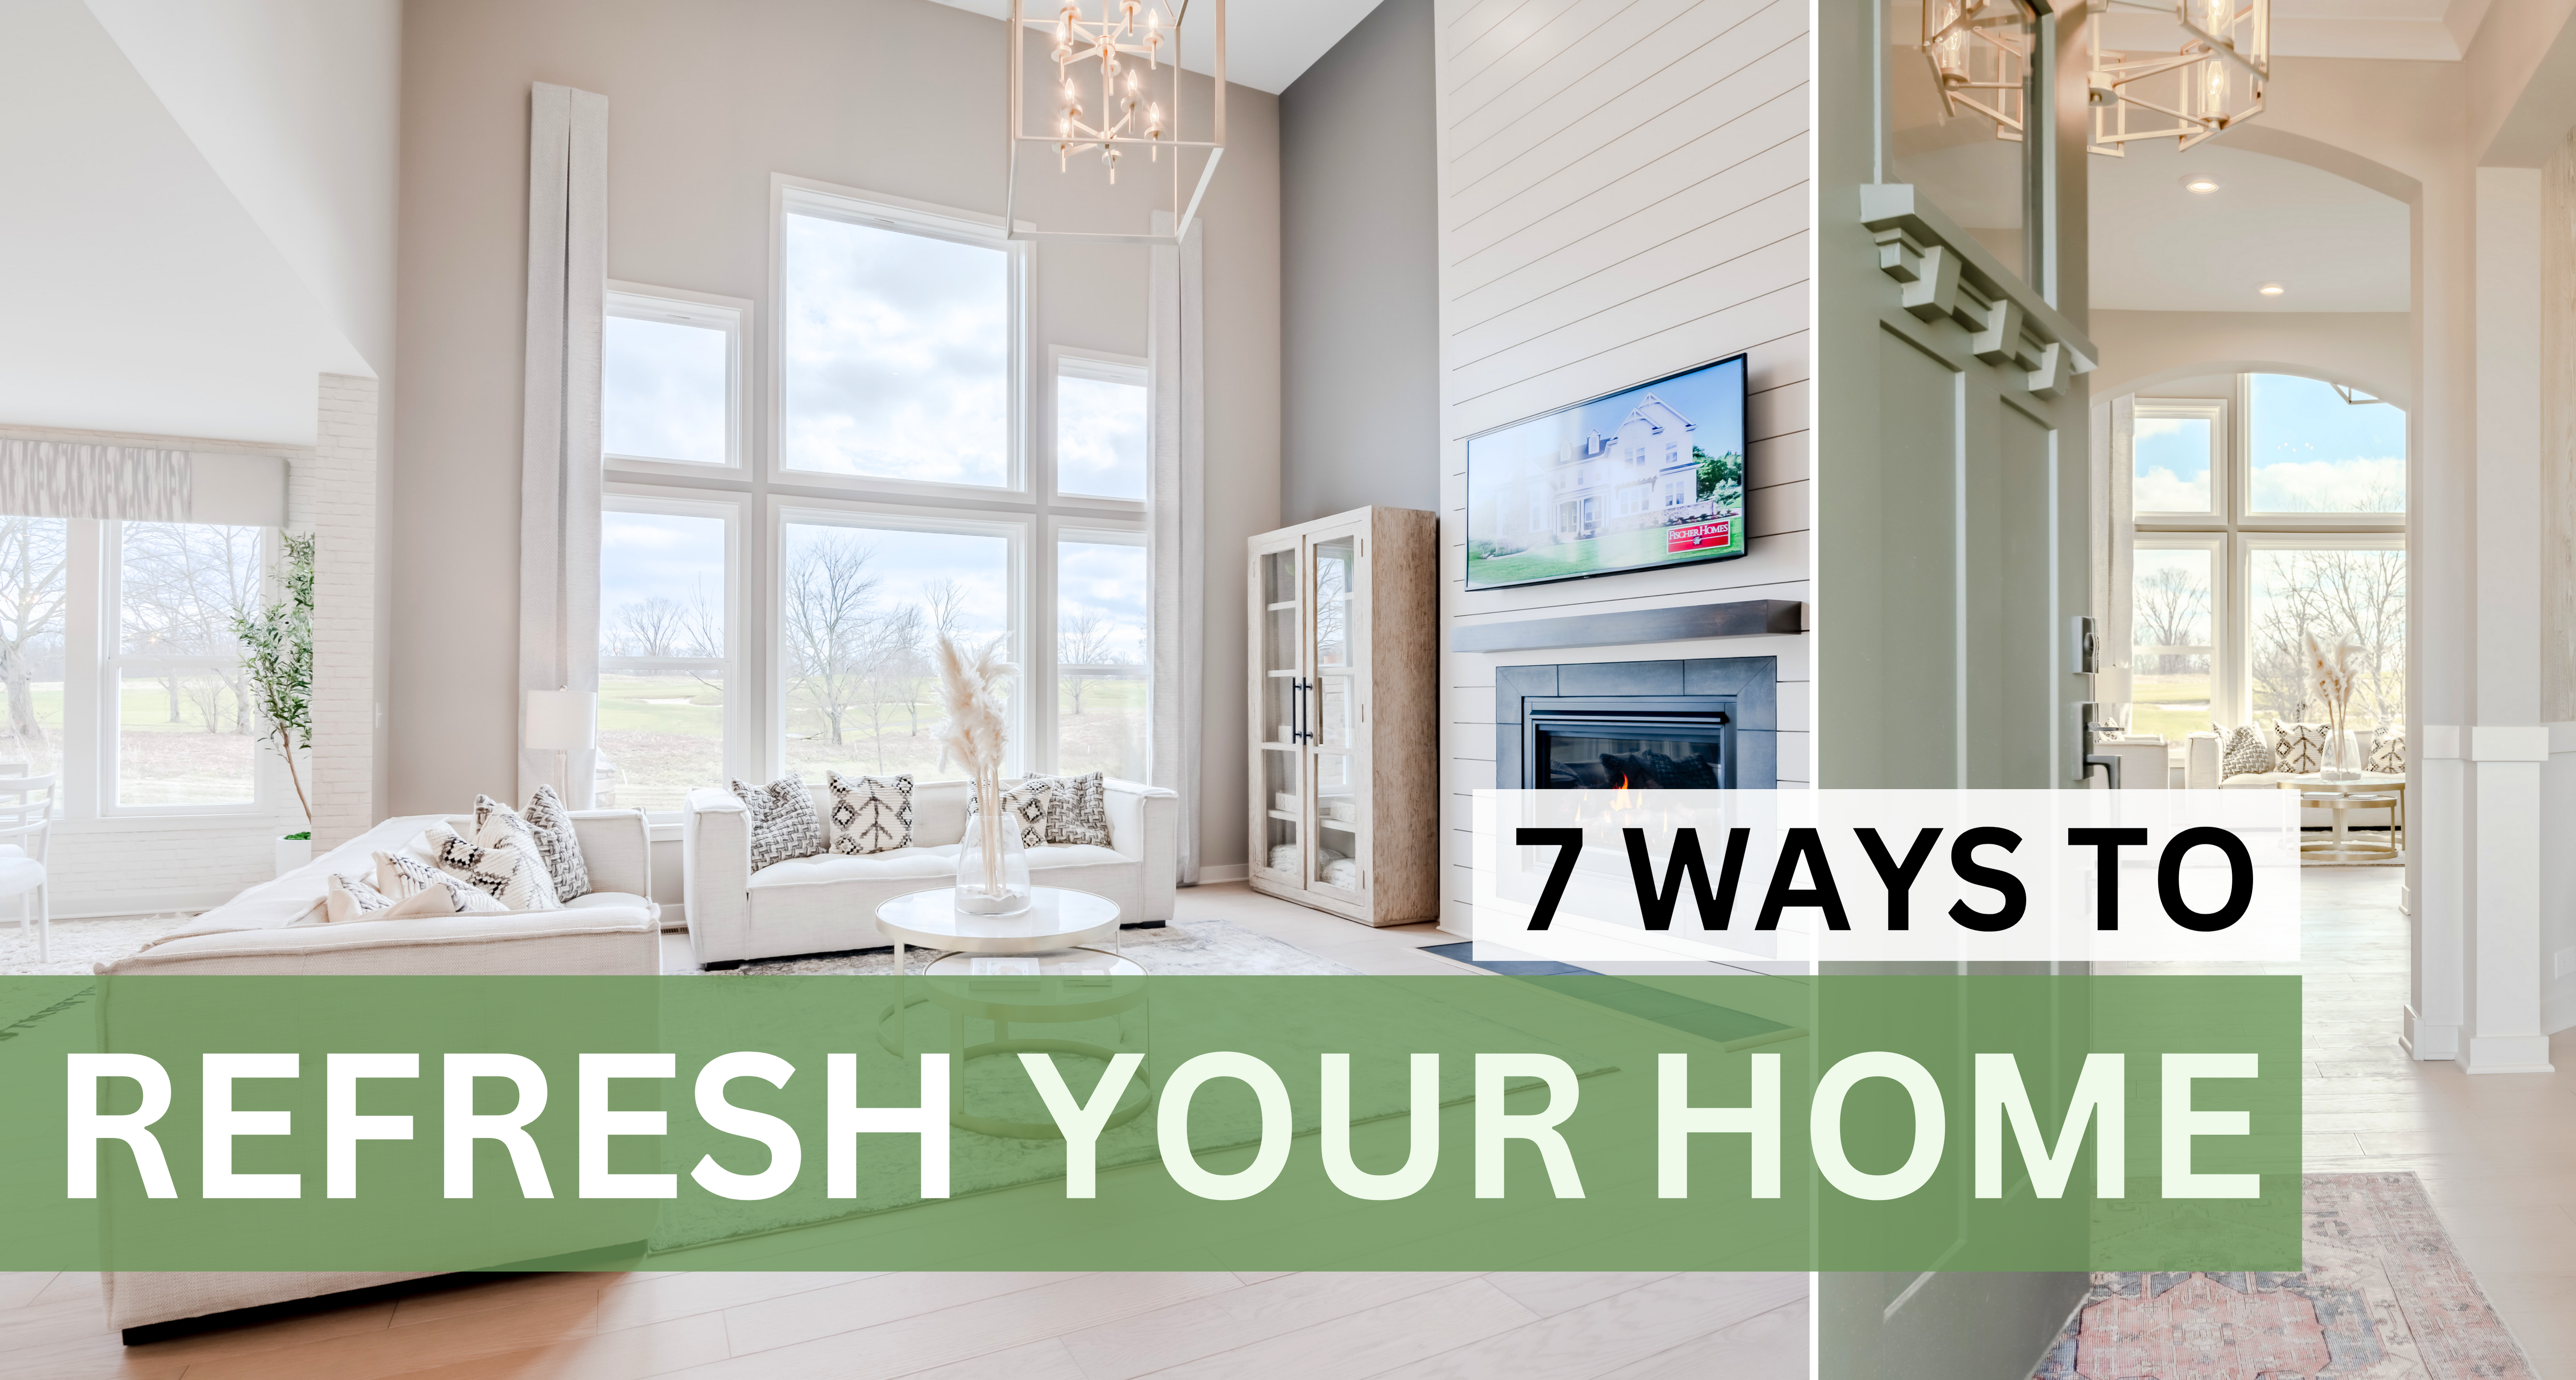 7 Ways to Refresh Your Home This Spring!